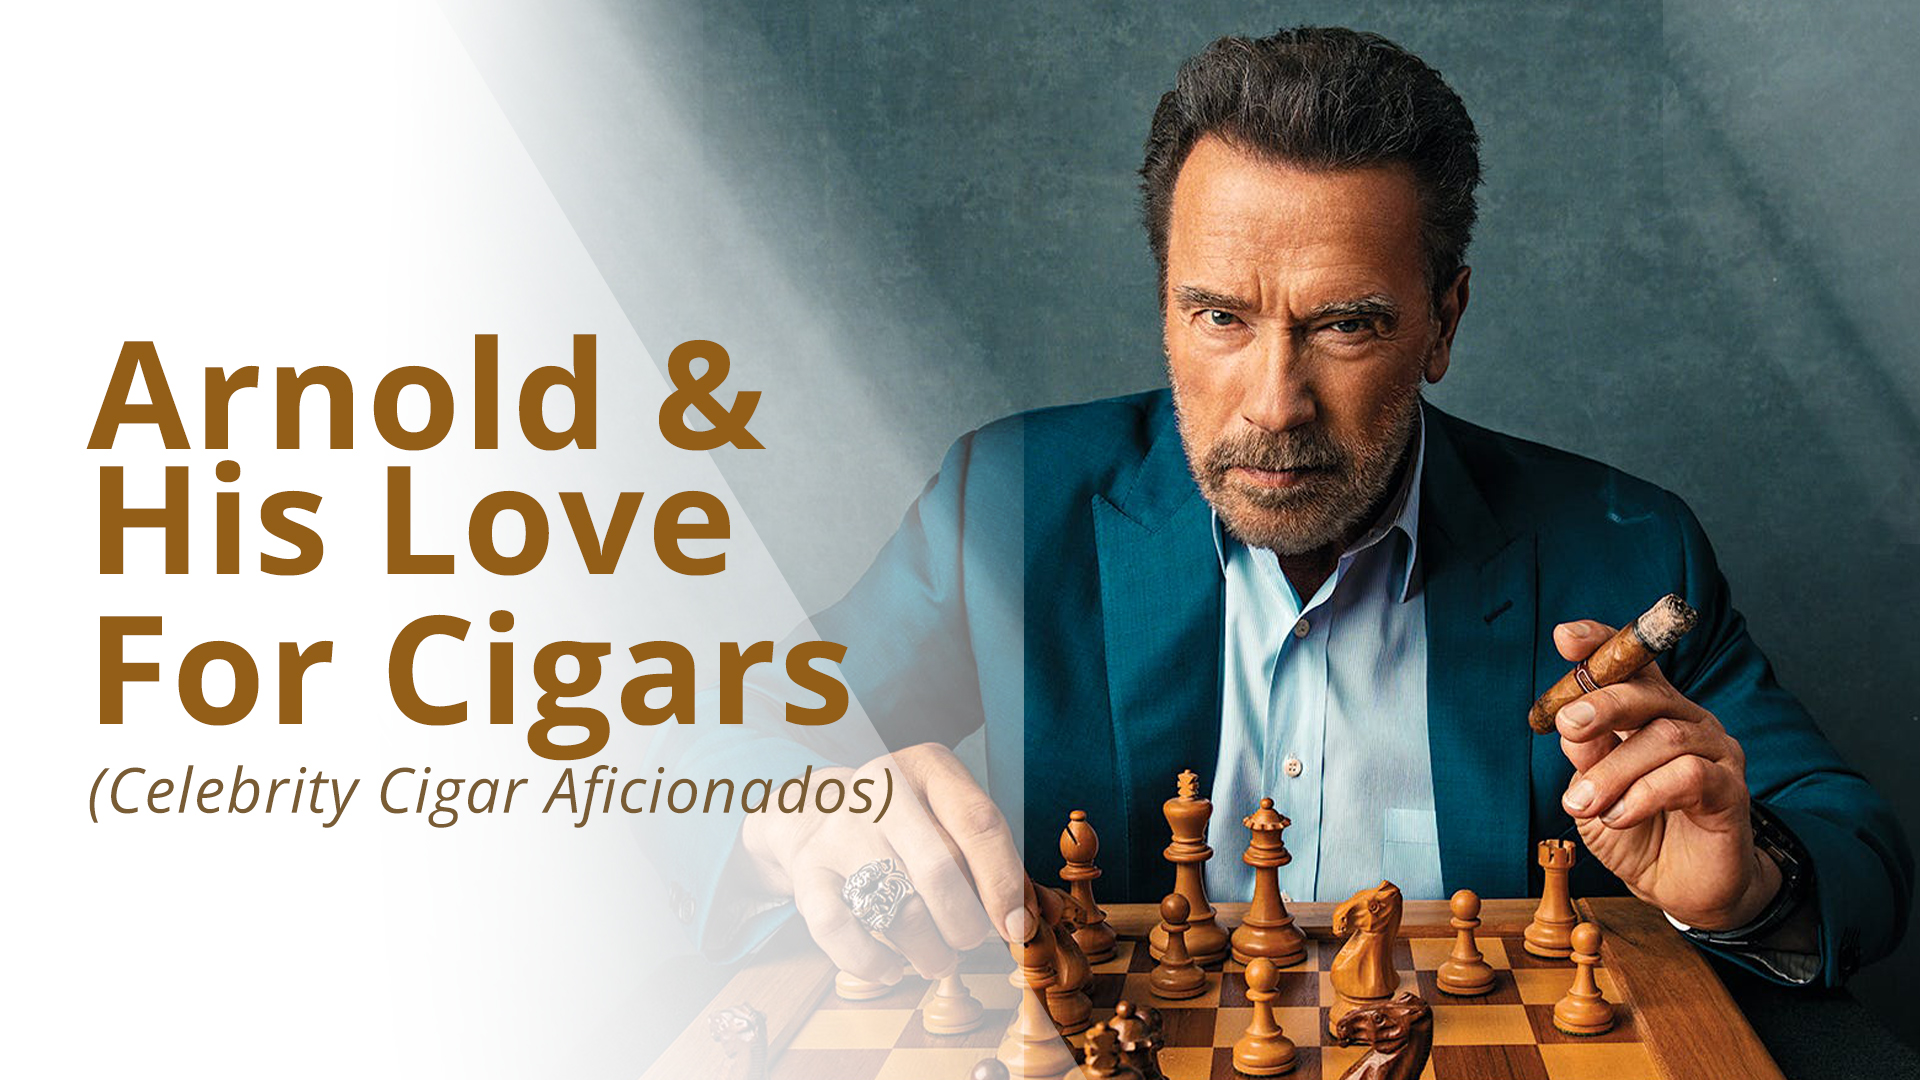 Arnold Schwarzenegger and his love for cigars